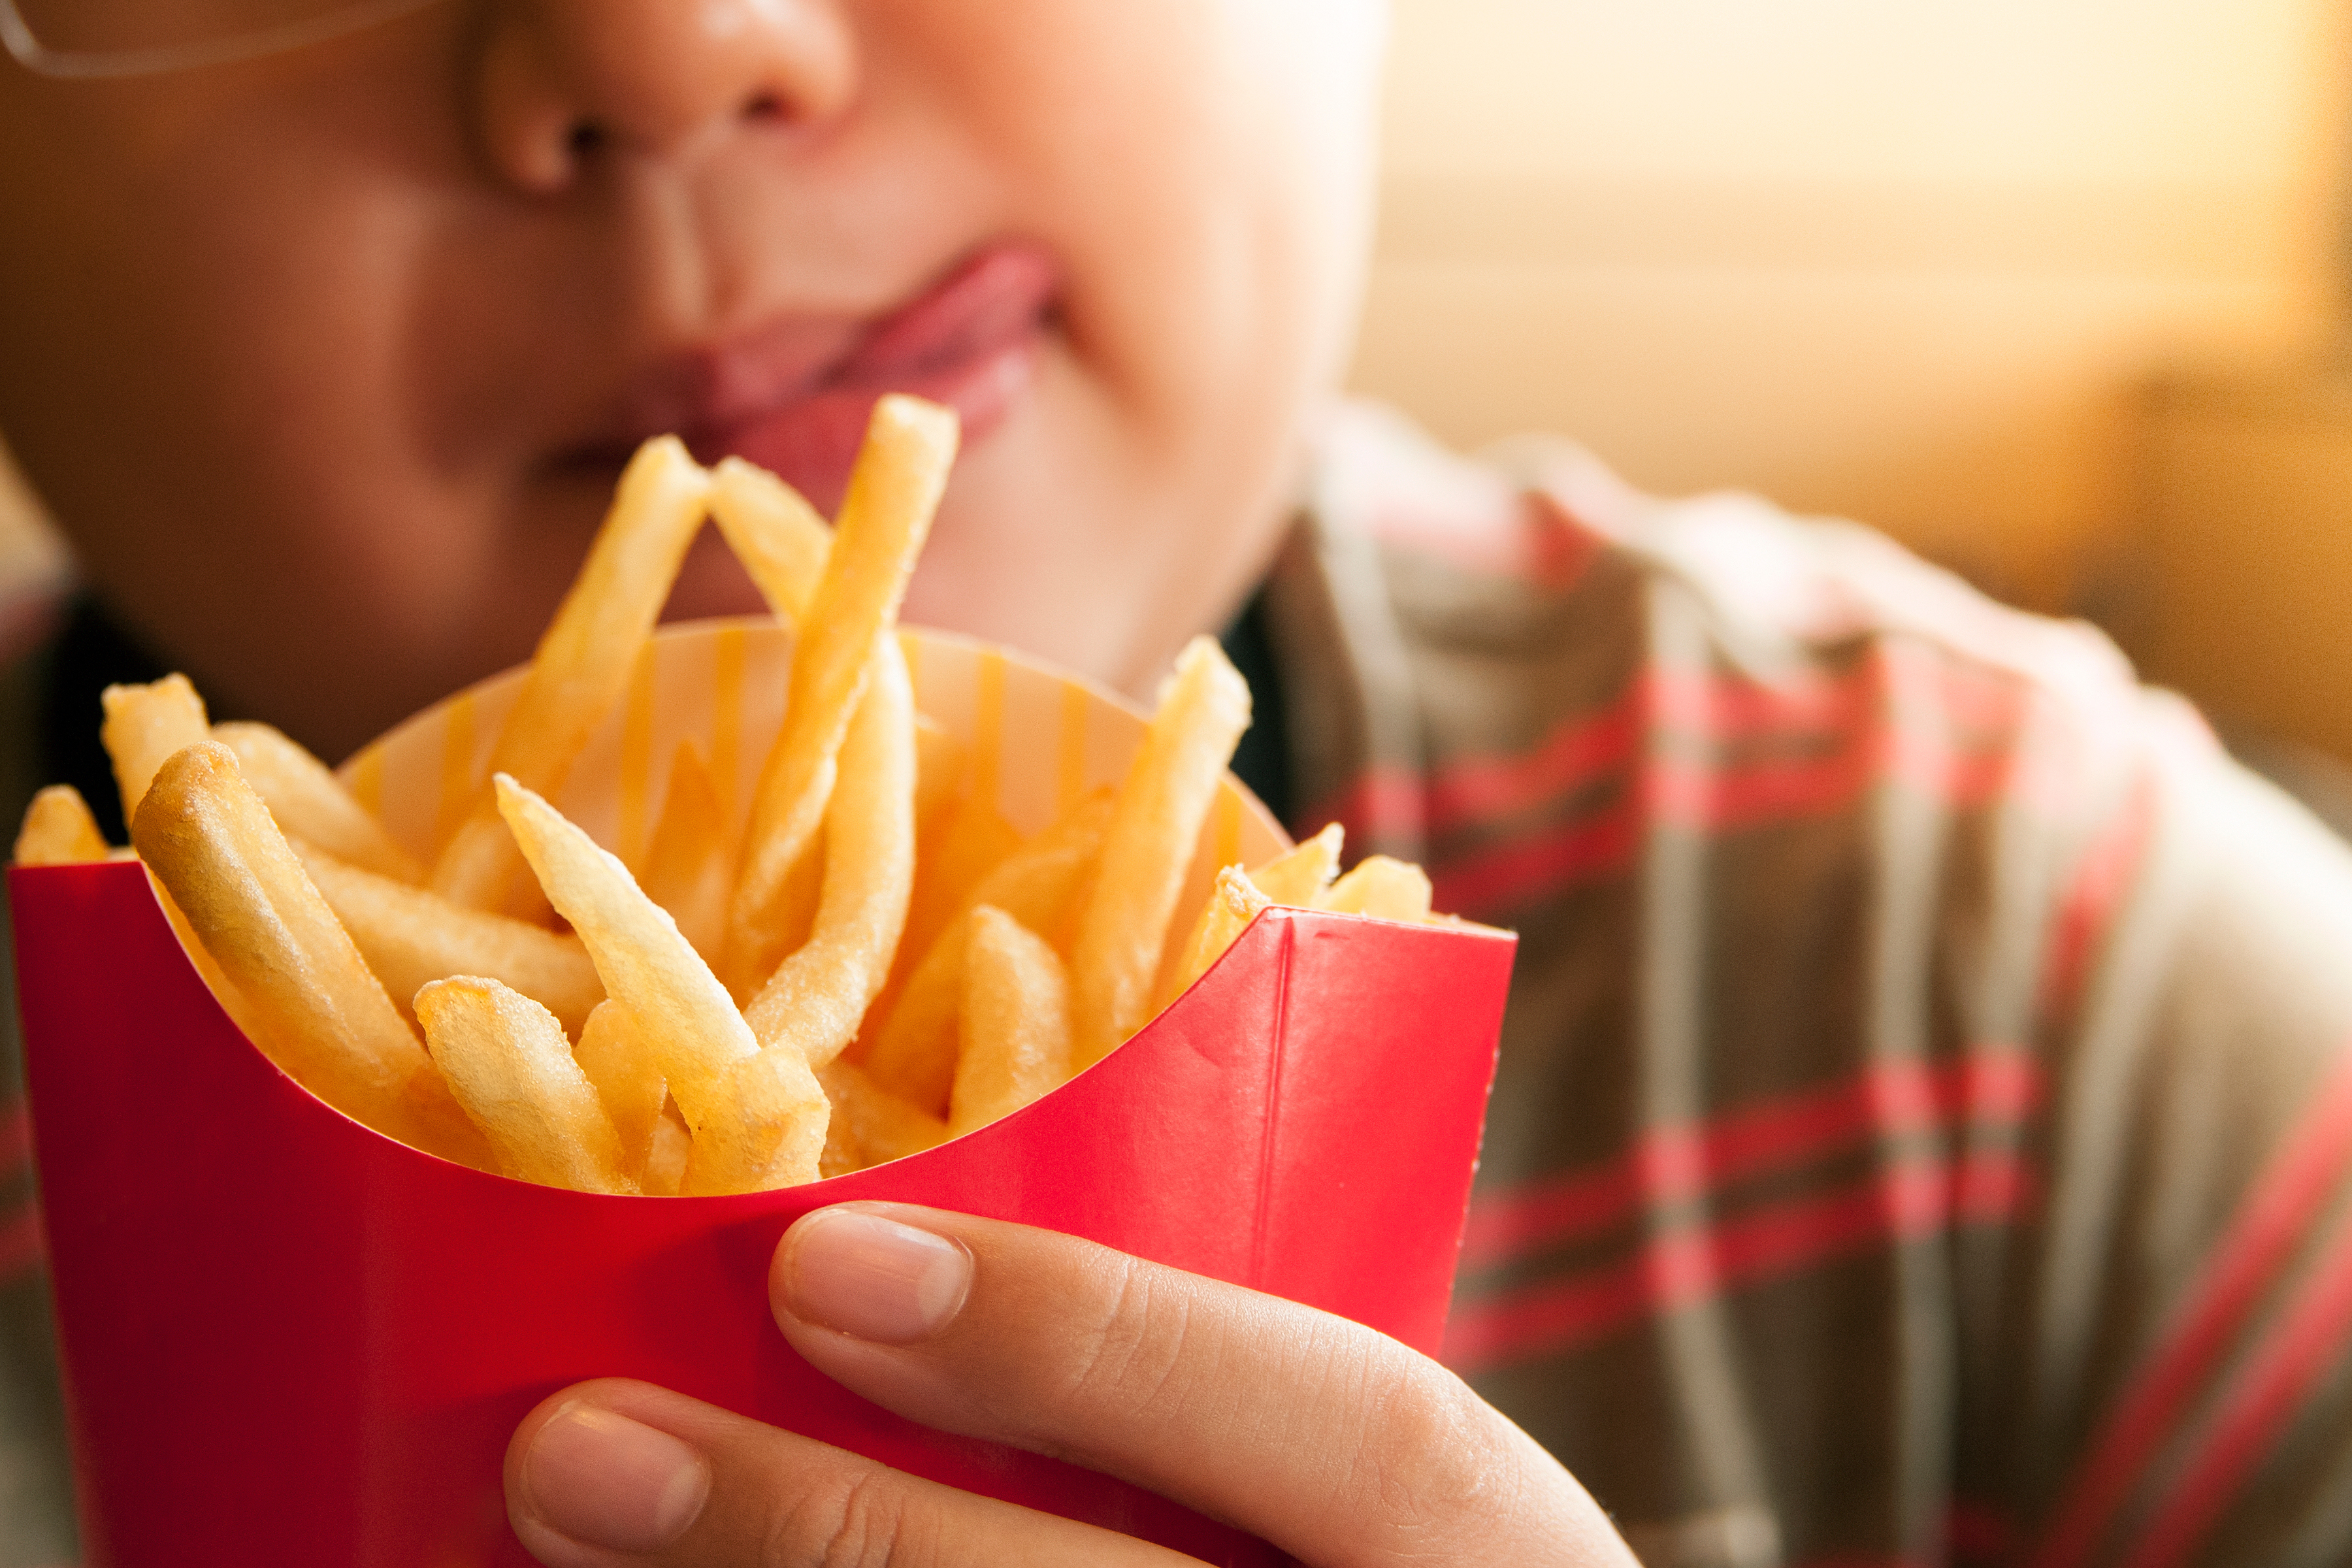 kid eating french fries